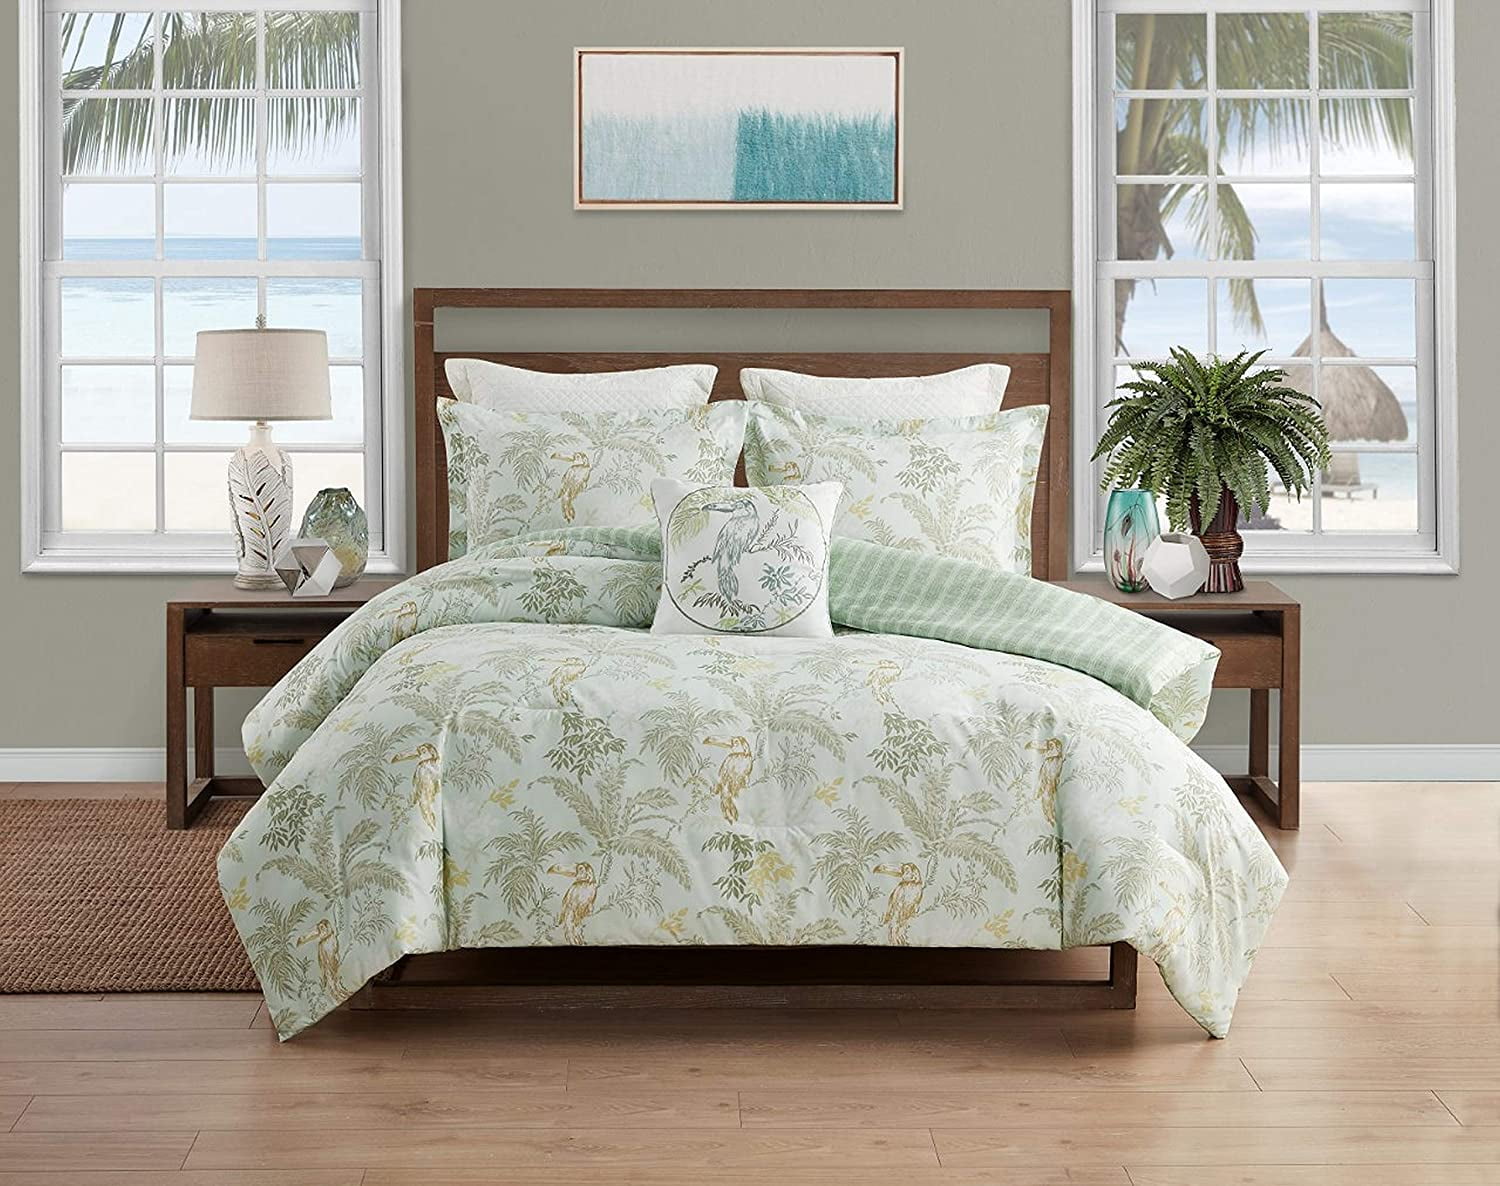 Tommy Bahama Palmiers 4 Piece Comforter, Tommy Bahama Palmiers Duvet Cover Set